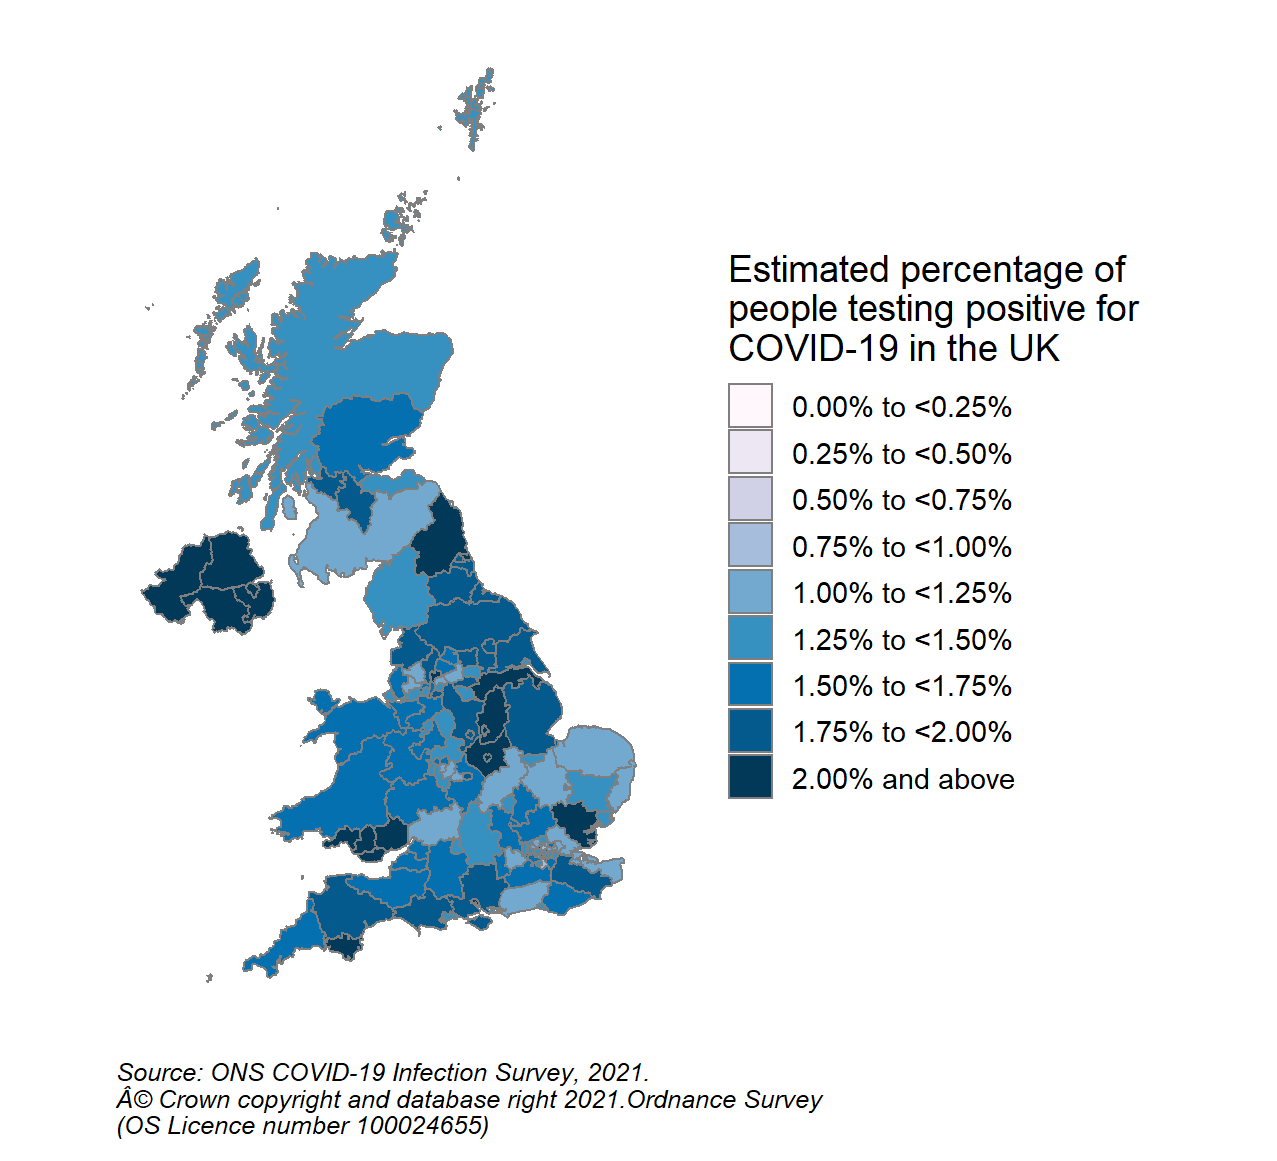 This colour coded map of the UK shows the modelled estimates of the percentage of the private residential population testing positive for COVID-19, by COVID-19 Infection Survey sub-regions. In Scotland, these sub-regions are comprised of Health Boards. The regions are: 123 - NHS Grampian, NHS Highland, NHS Orkney, NHS Shetland and NHS Western Isles, 124 - NHS Fife, NHS Forth Valley and NHS Tayside, 125 - NHS Greater Glasgow & Clyde, 126 - NHS Lothian, 127 - NHS Lanarkshire, 128 - NHS Ayrshire & Arran, NHS Borders and NHS Dumfries & Galloway.  The sub-region with the highest modelled estimate for the percentage of people testing positive was CIS Region 127 (NHS Lanarkshire) at 1.94% (95% credible interval: 1.56% to 2.42%).  The sub-region with the lowest modelled estimate was Region 128 (NHS Ayrshire & Arran, NHS Borders and NHS Dumfries & Galloway), at 1.25% (95% credible interval: 0.97% to 1.58%).